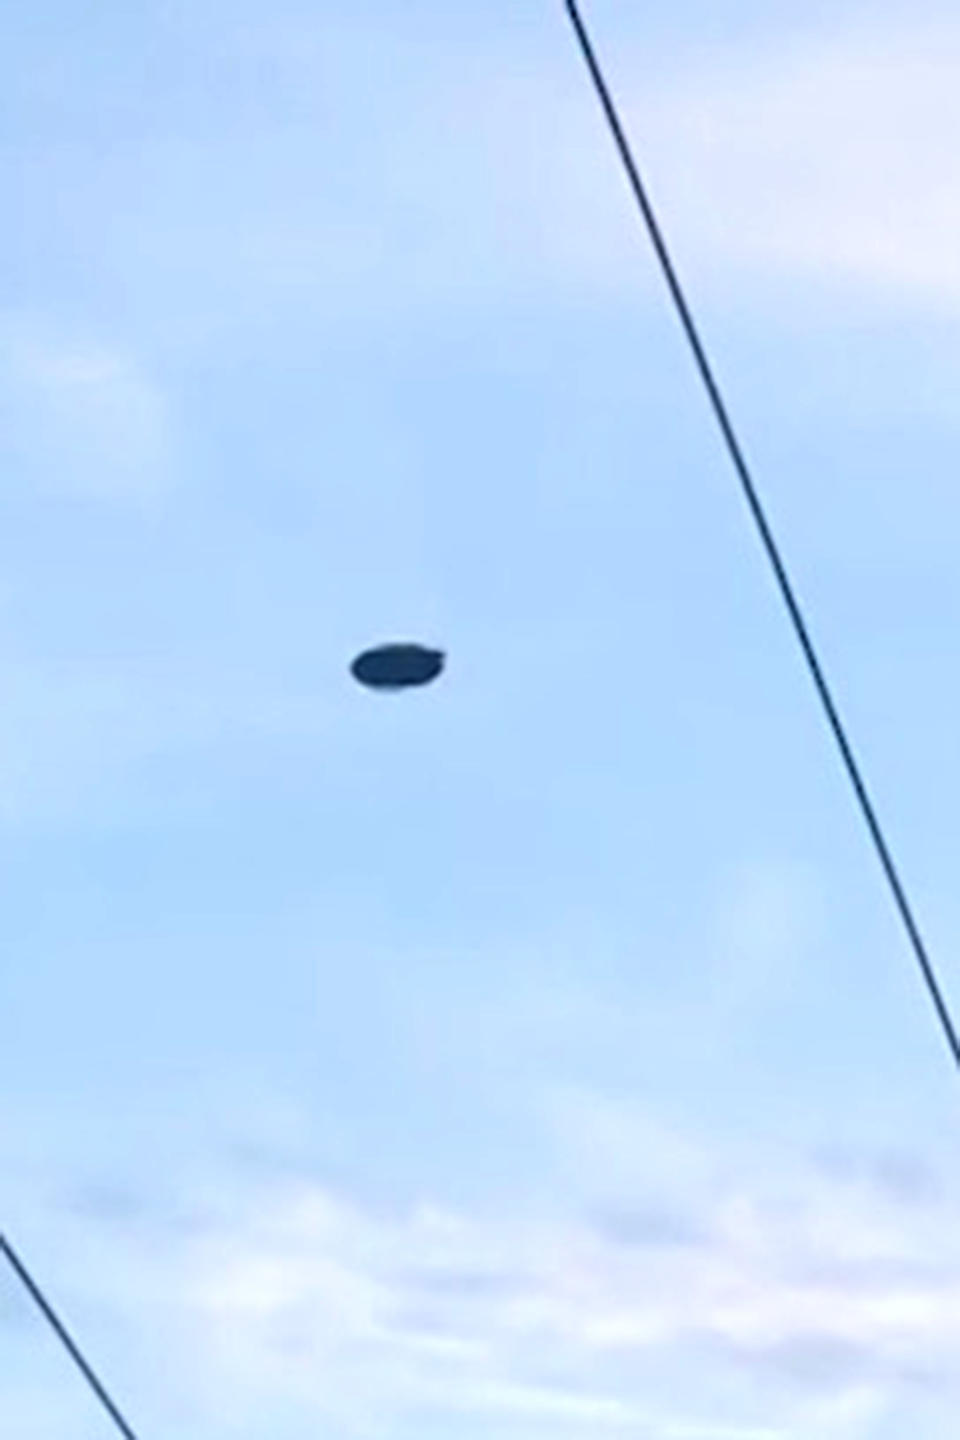 Junelyn Bitalac was returning from dropping her mum off at work in Hastings, a suburb of Melbourne, on the morning of May 28 when she noticed the black object hovering in the sky. Photo: Caters